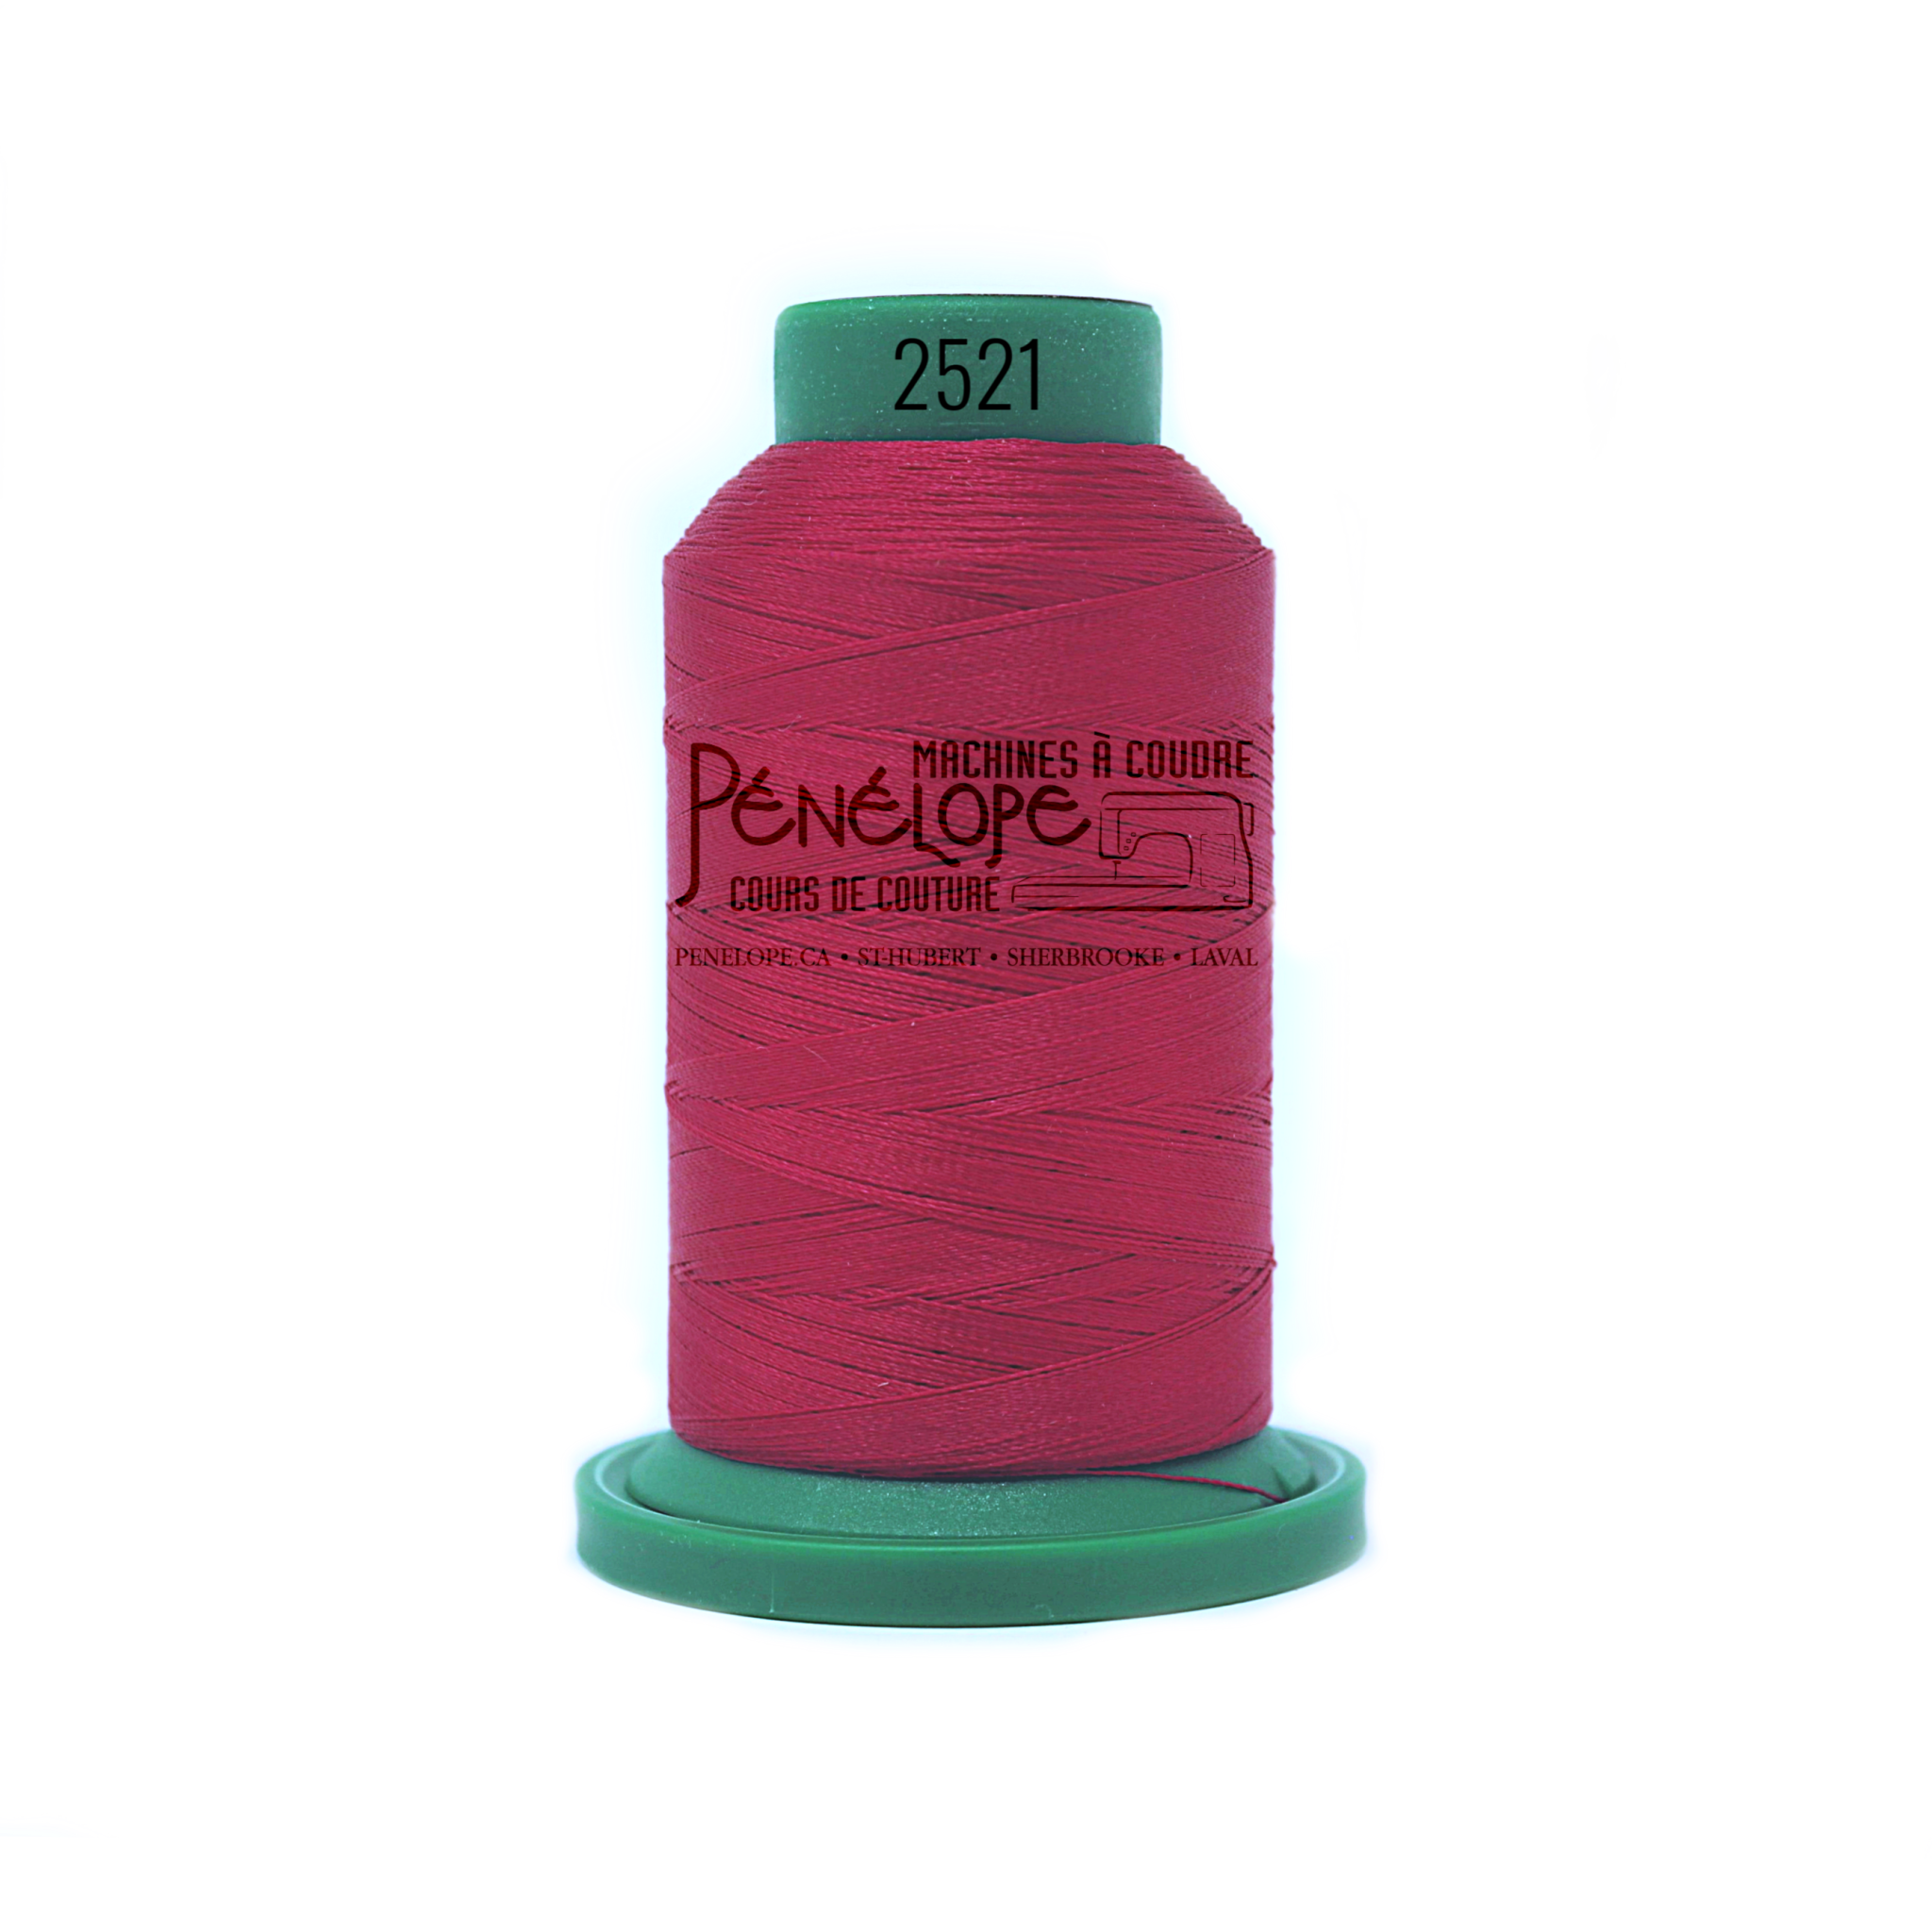 Isacord Isacord sewing and embroidery thread 2521